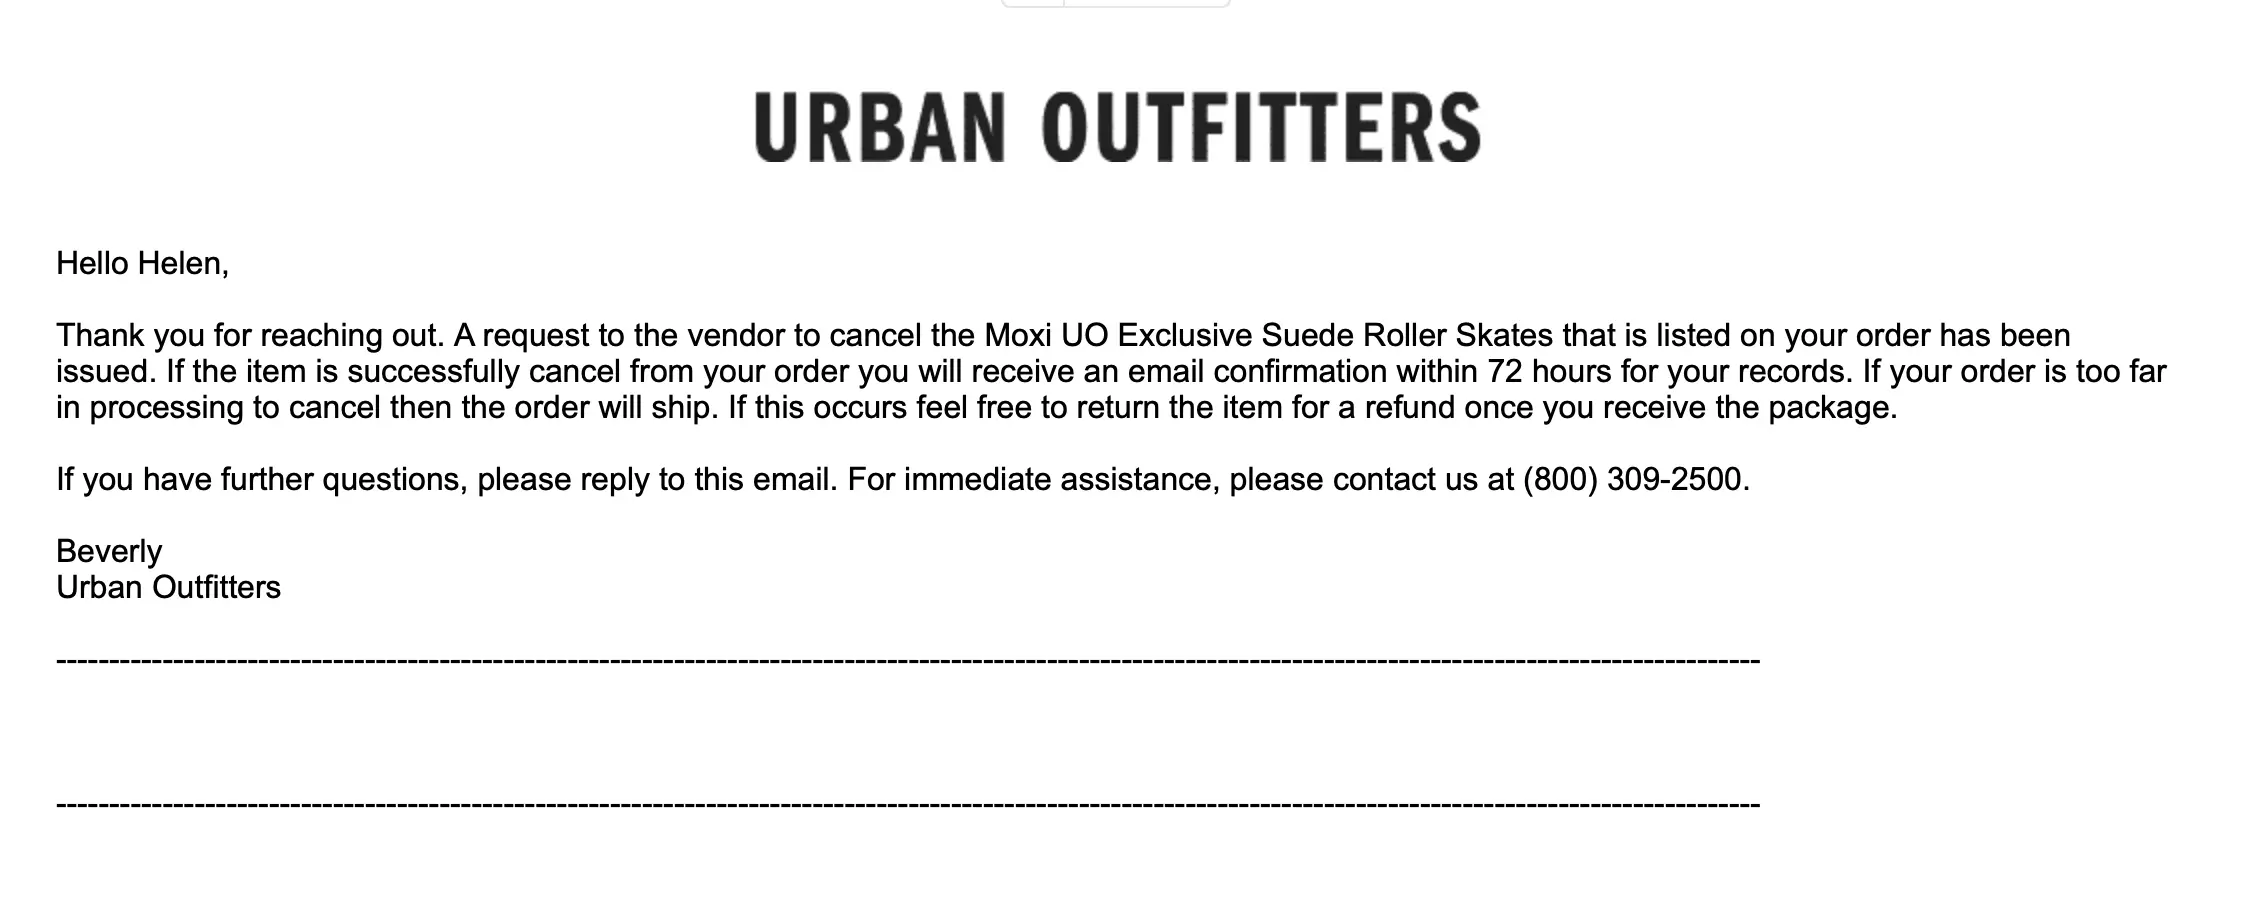 Cancel Urban Outfitters Order